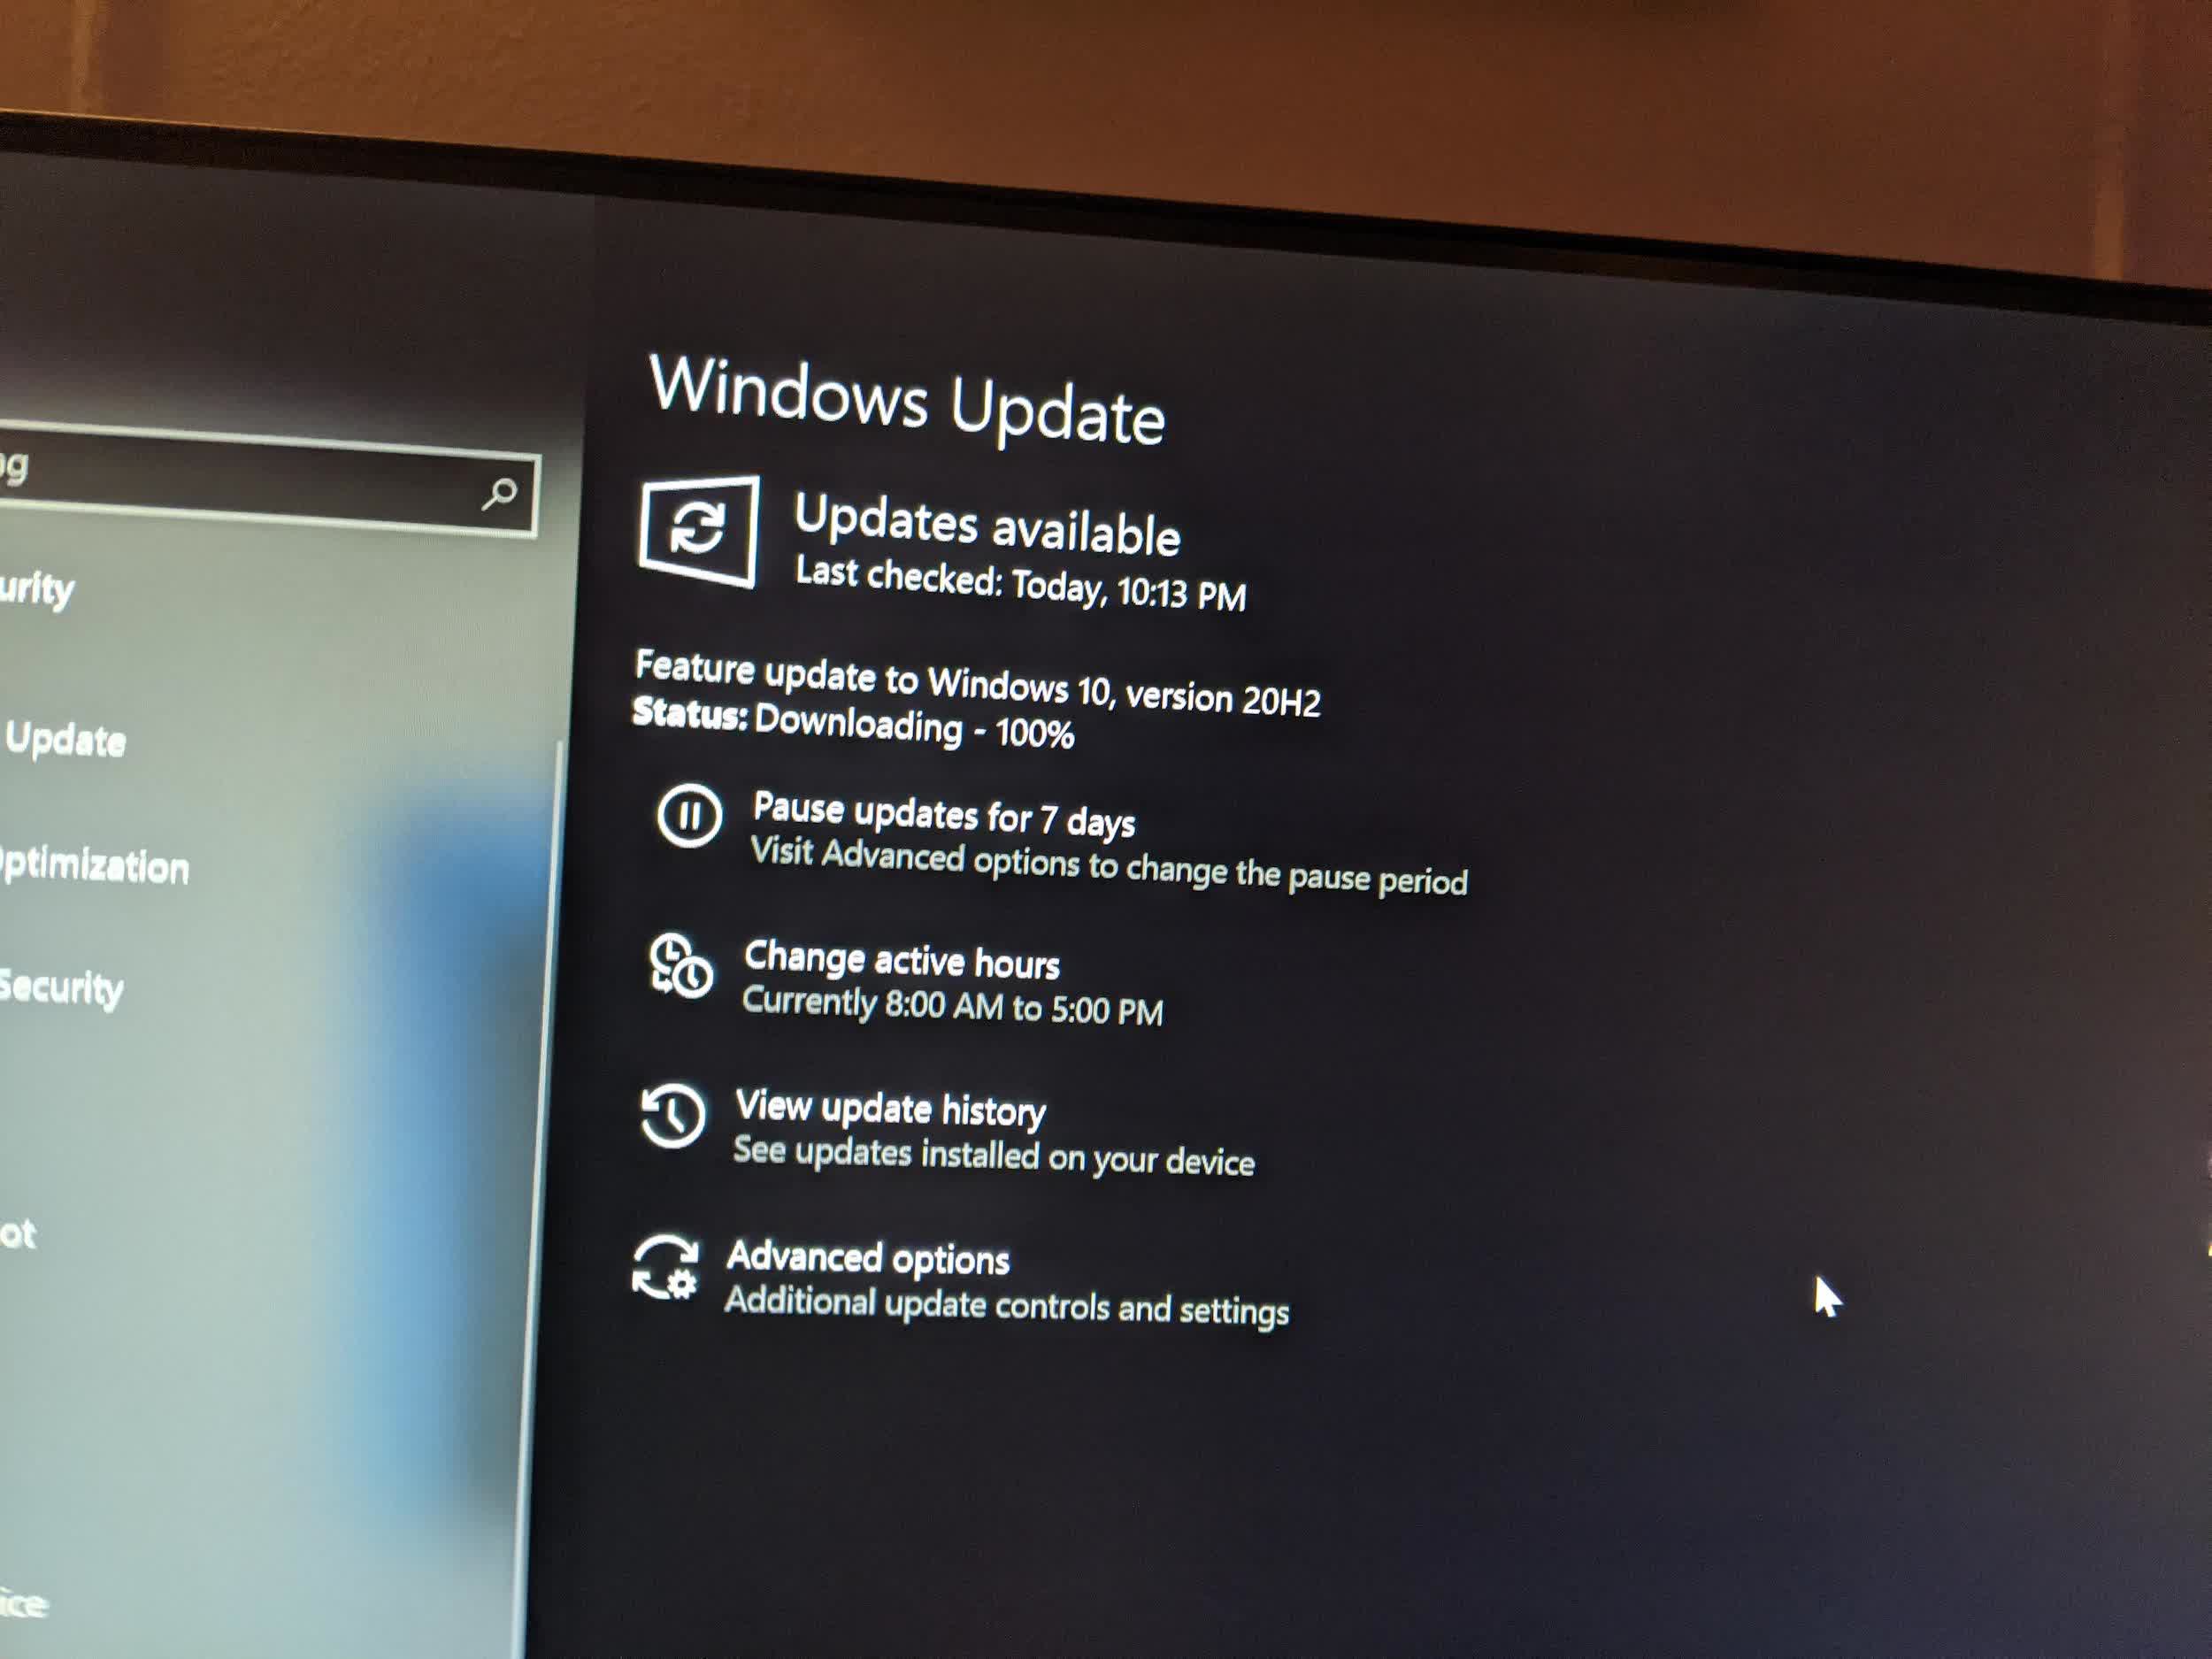 Old Windows updates will now be expired to improve performance and user experience